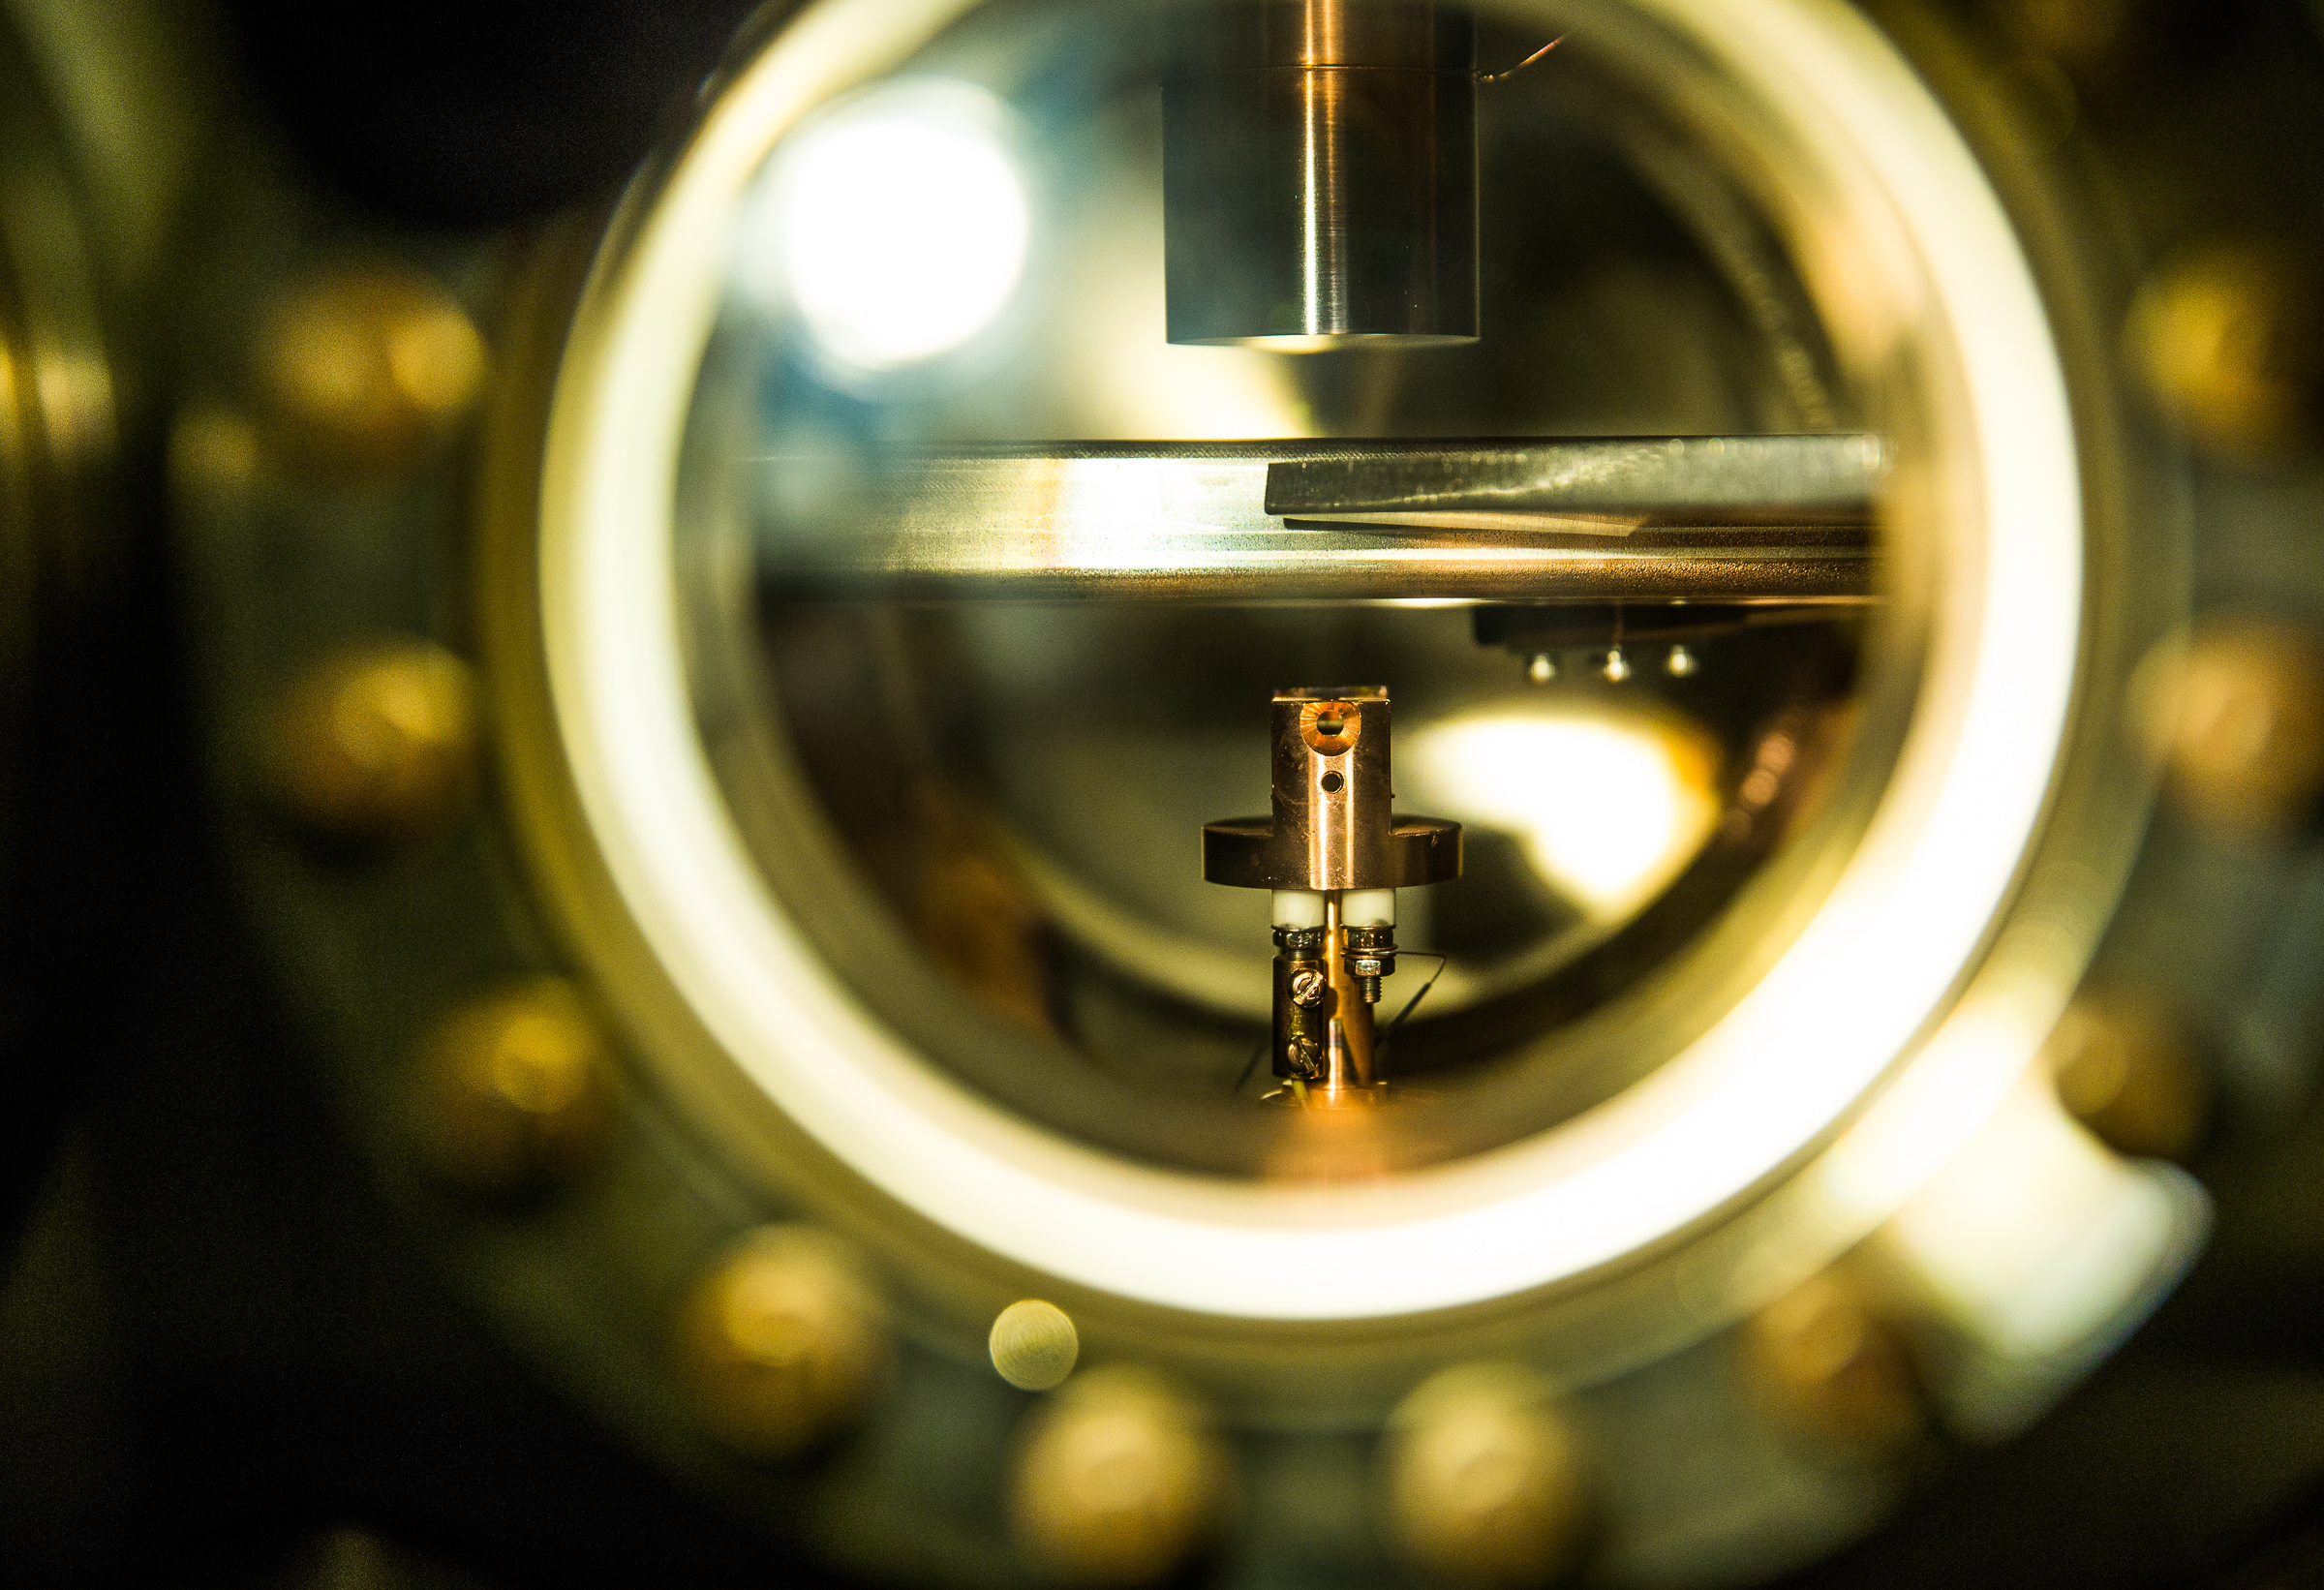 Photo - "More than Meets the Eye: Detail of the Spin-Polarized Low-Energy Electron Microscope (SPLEEM) at Lawrence Berkeley National Laboratory's Molecular Foundry." (Credit: José Luis Aguirre)